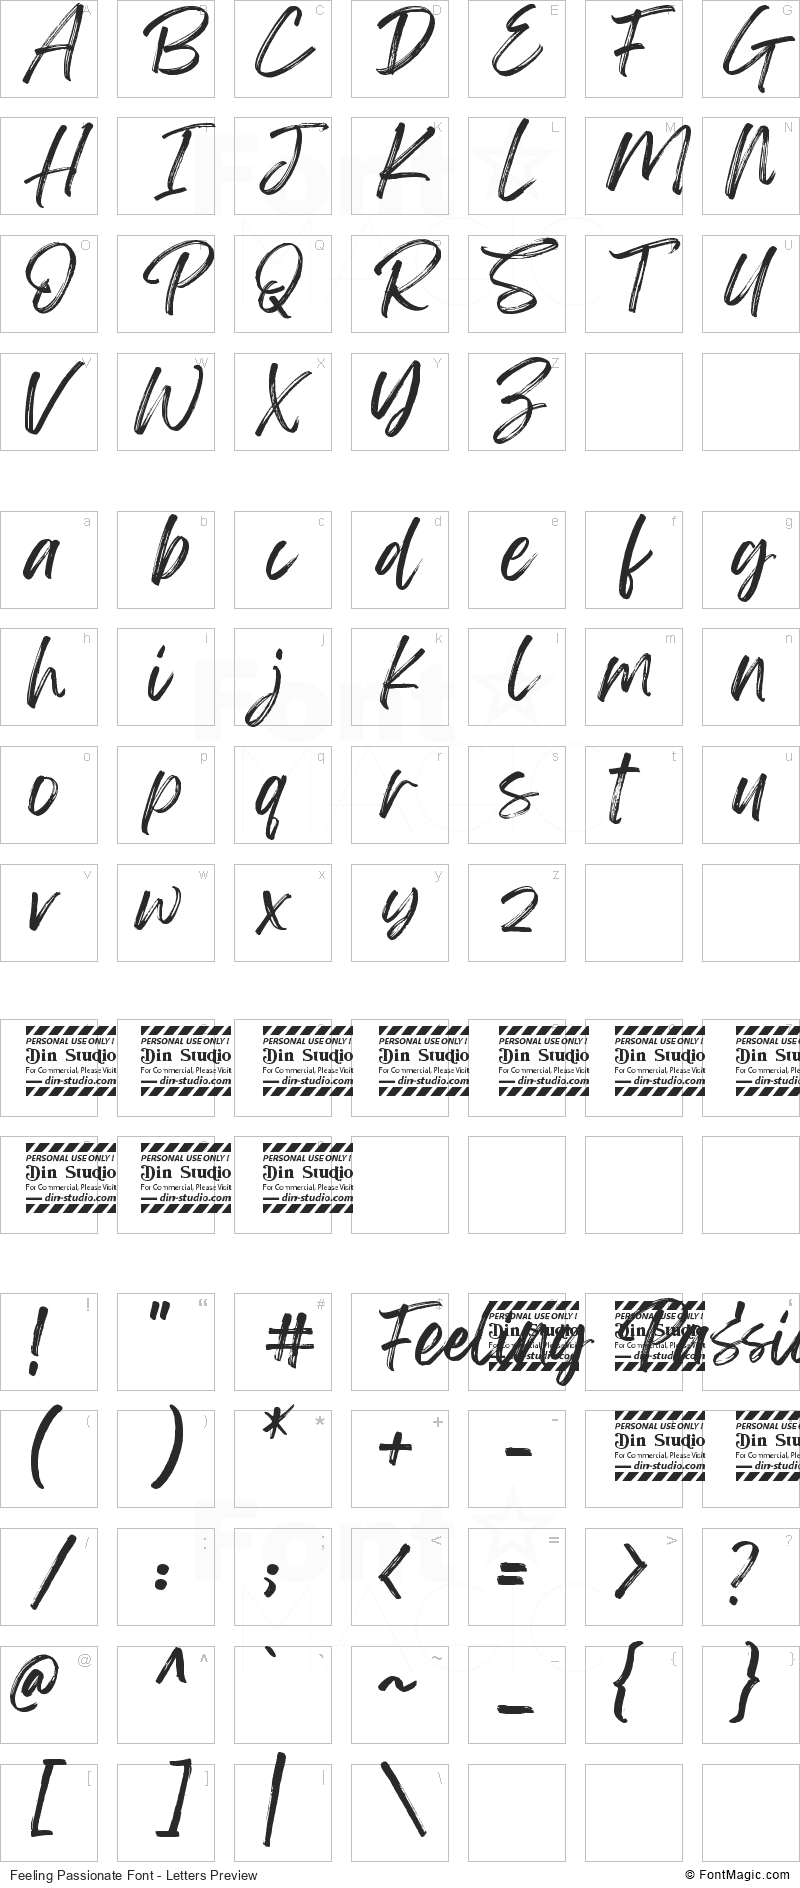 Feeling Passionate Font - All Latters Preview Chart